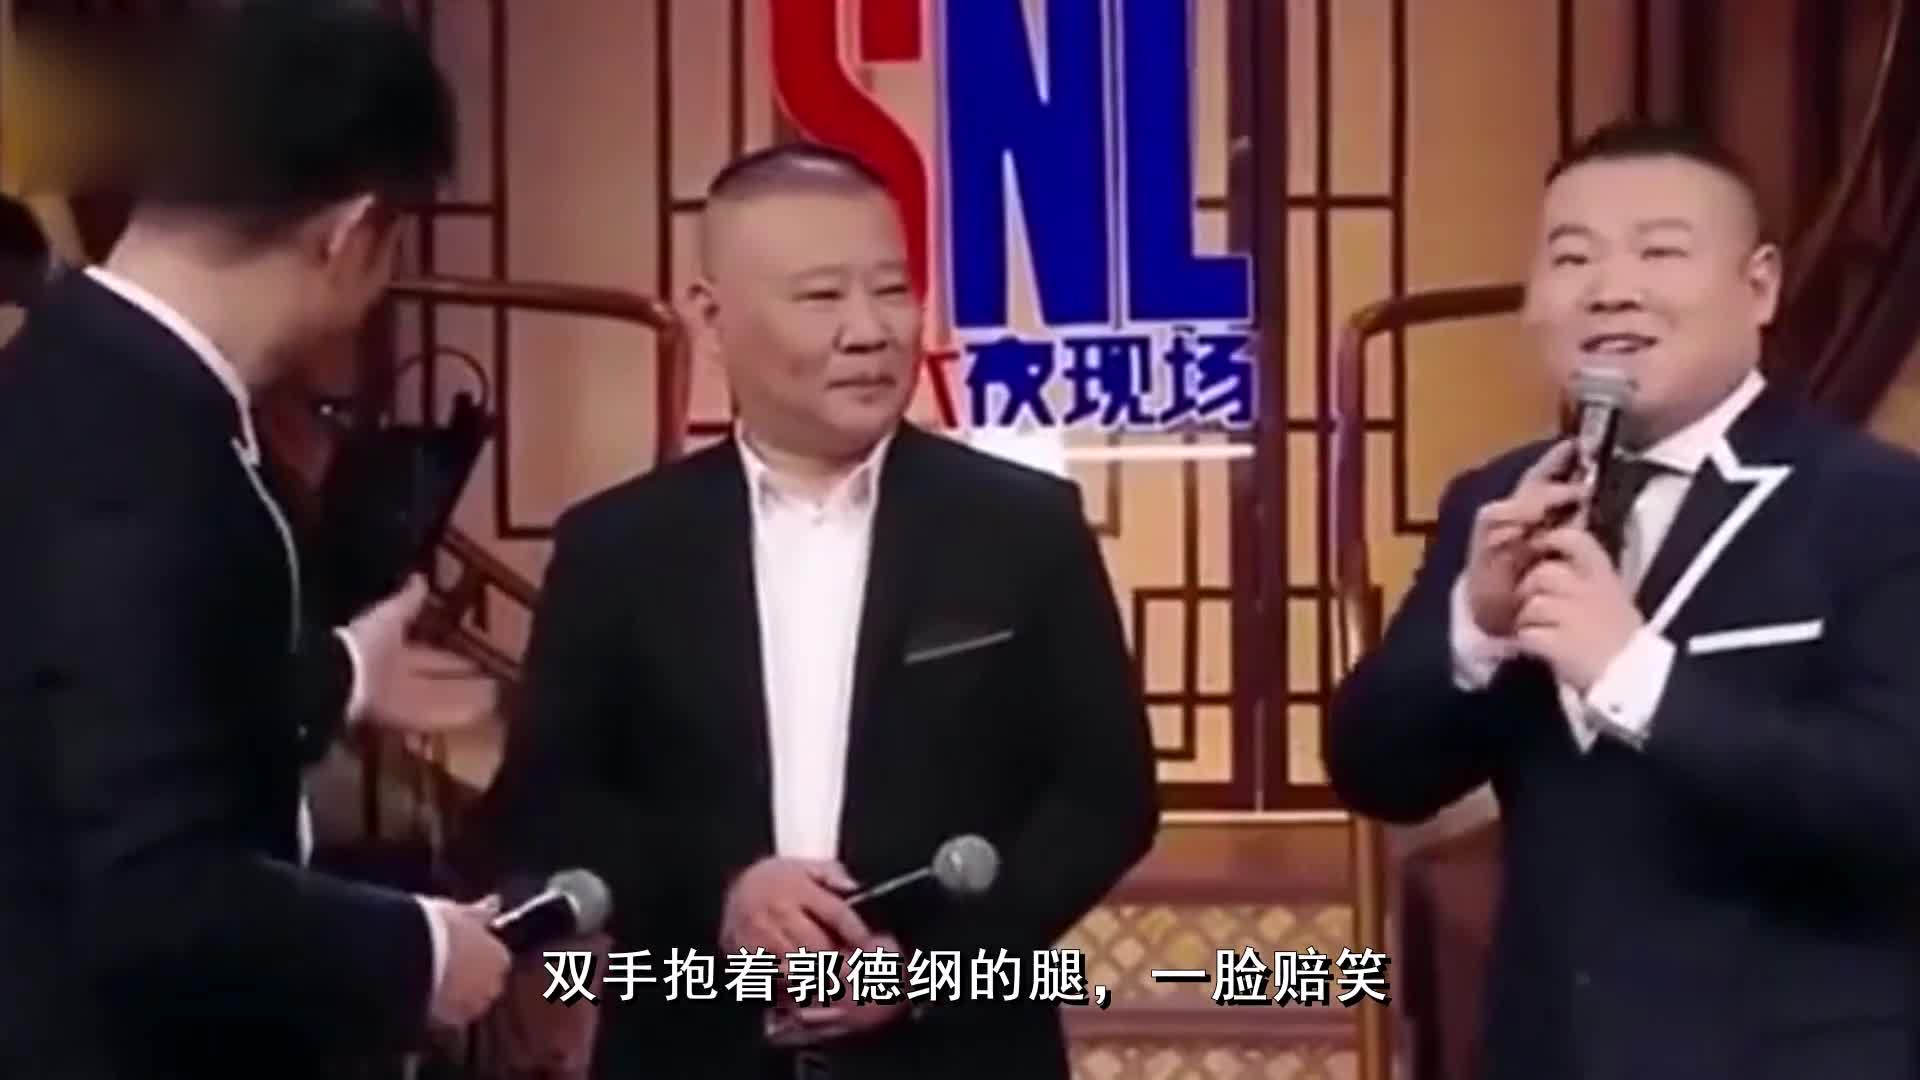 Yue Yunpeng laughed at Guo Degang's local demeanor, but Guo Degang stood behind him, and then his actions made the audience laugh.